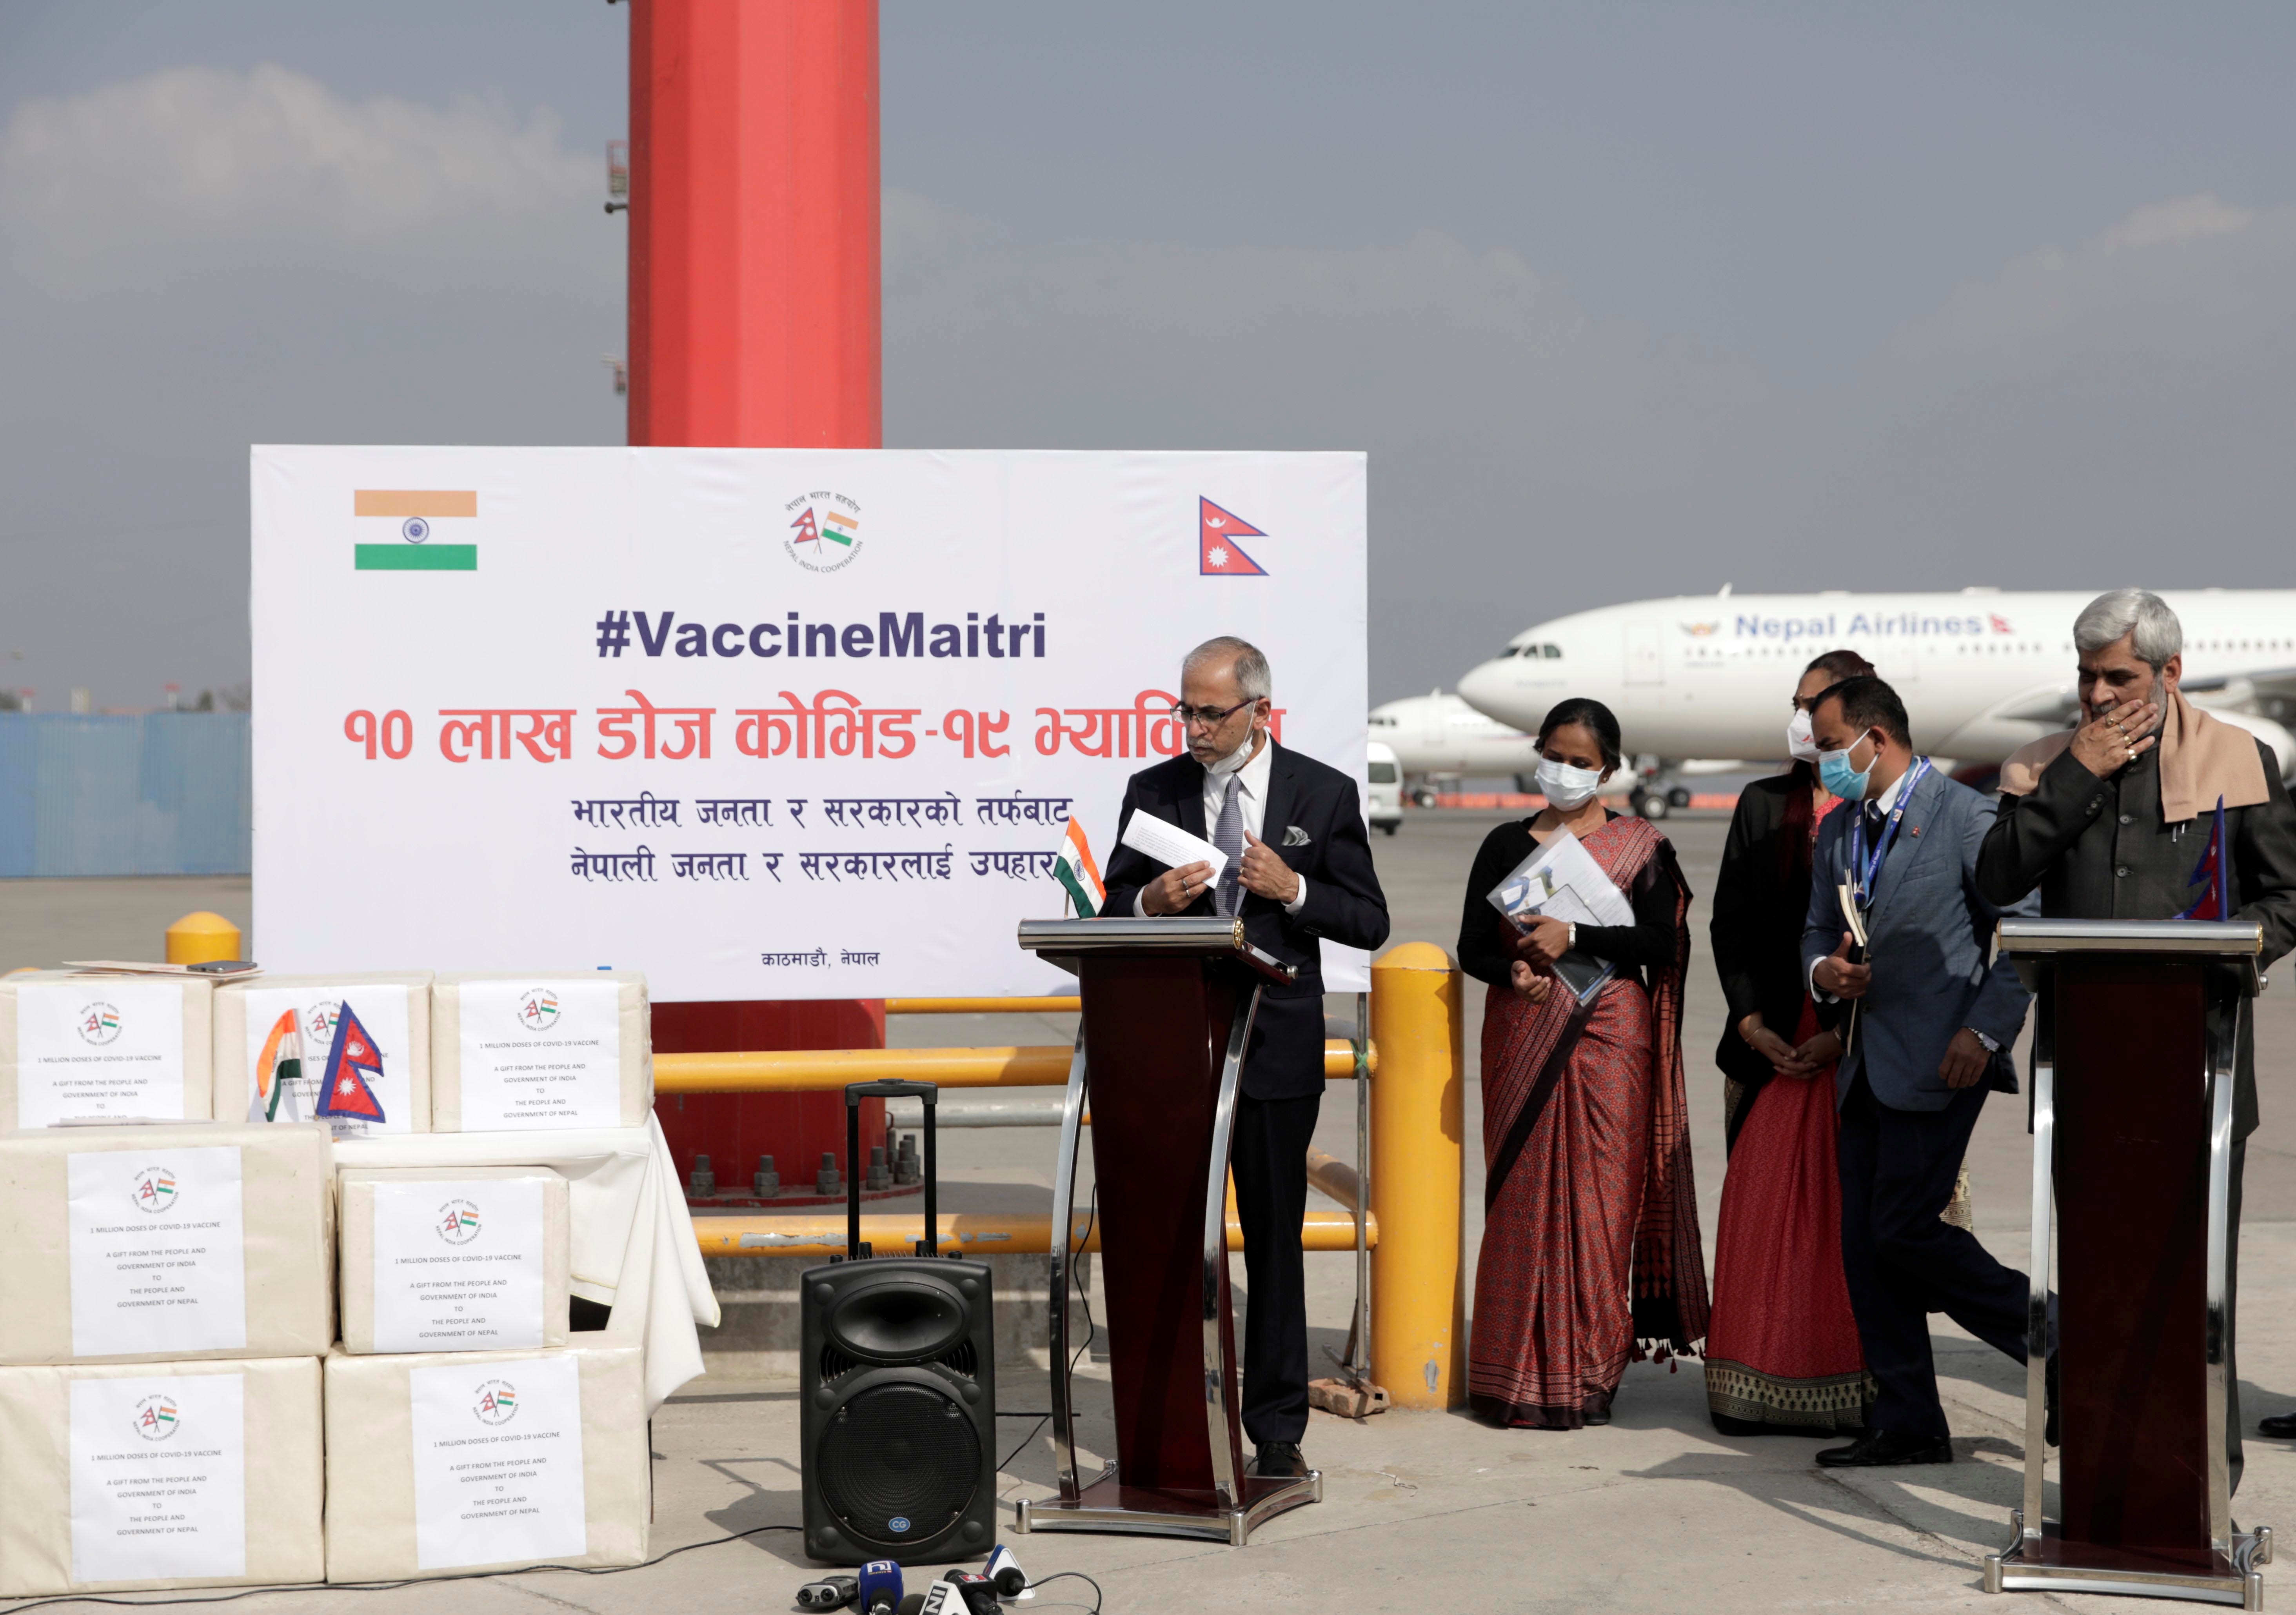 Nepal's Minister for Health and Population Hridayesh Tripathi and Indian ambassador to Nepal Vinay Mohan Kwatra attend the vaccine handover ceremony upon the arrival of the first batch of COVID-19 vaccines provided by the Government of India as a grant to Nepal, at Tribhuvan International Airport in Kathmandu, on Thursday, January 21, 2021. Photo: Reuters 